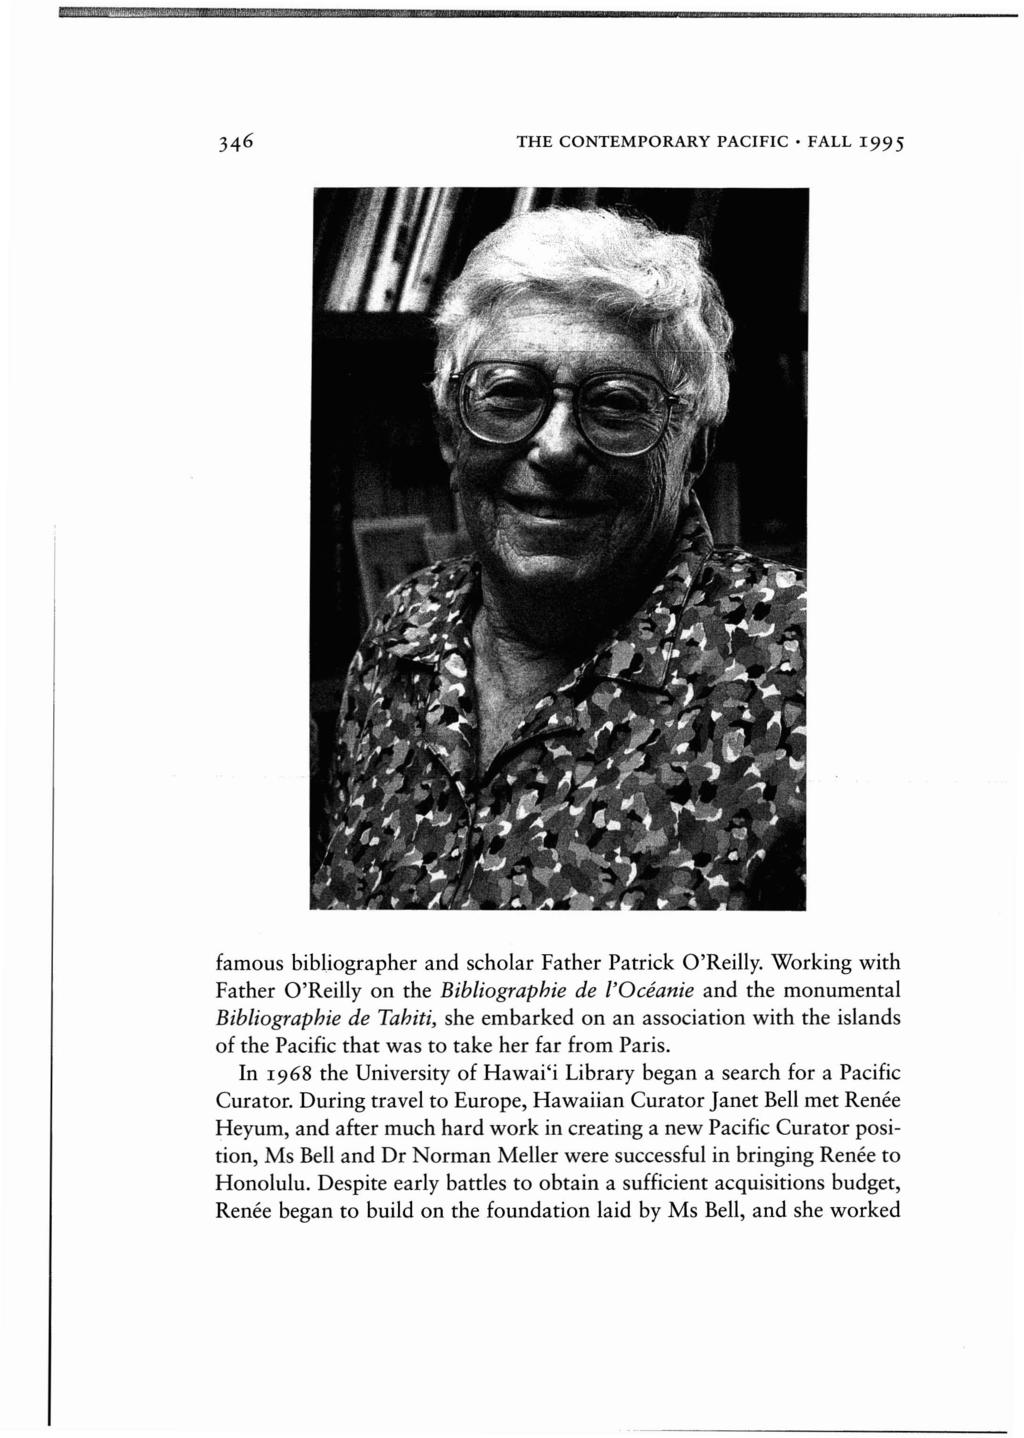 THE CONTEMPORARY PACIFIC FALL 1995 famous bibliographer and scholar Father Patrick O'Reilly.